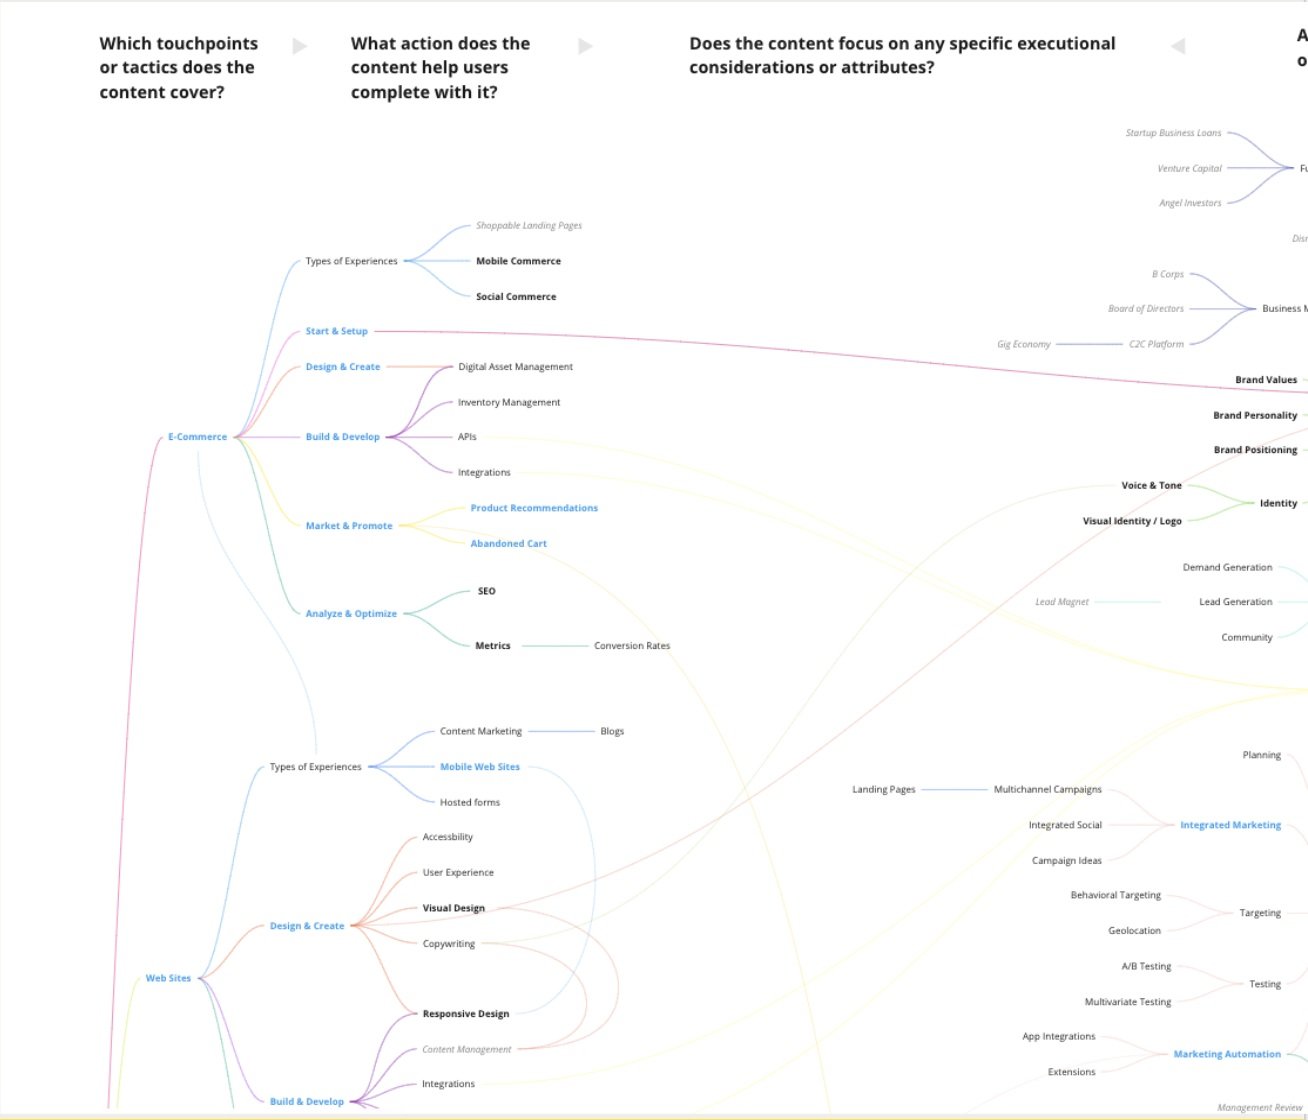 Mapping Taxonomy across the Mailchimp Digital Ecosystem